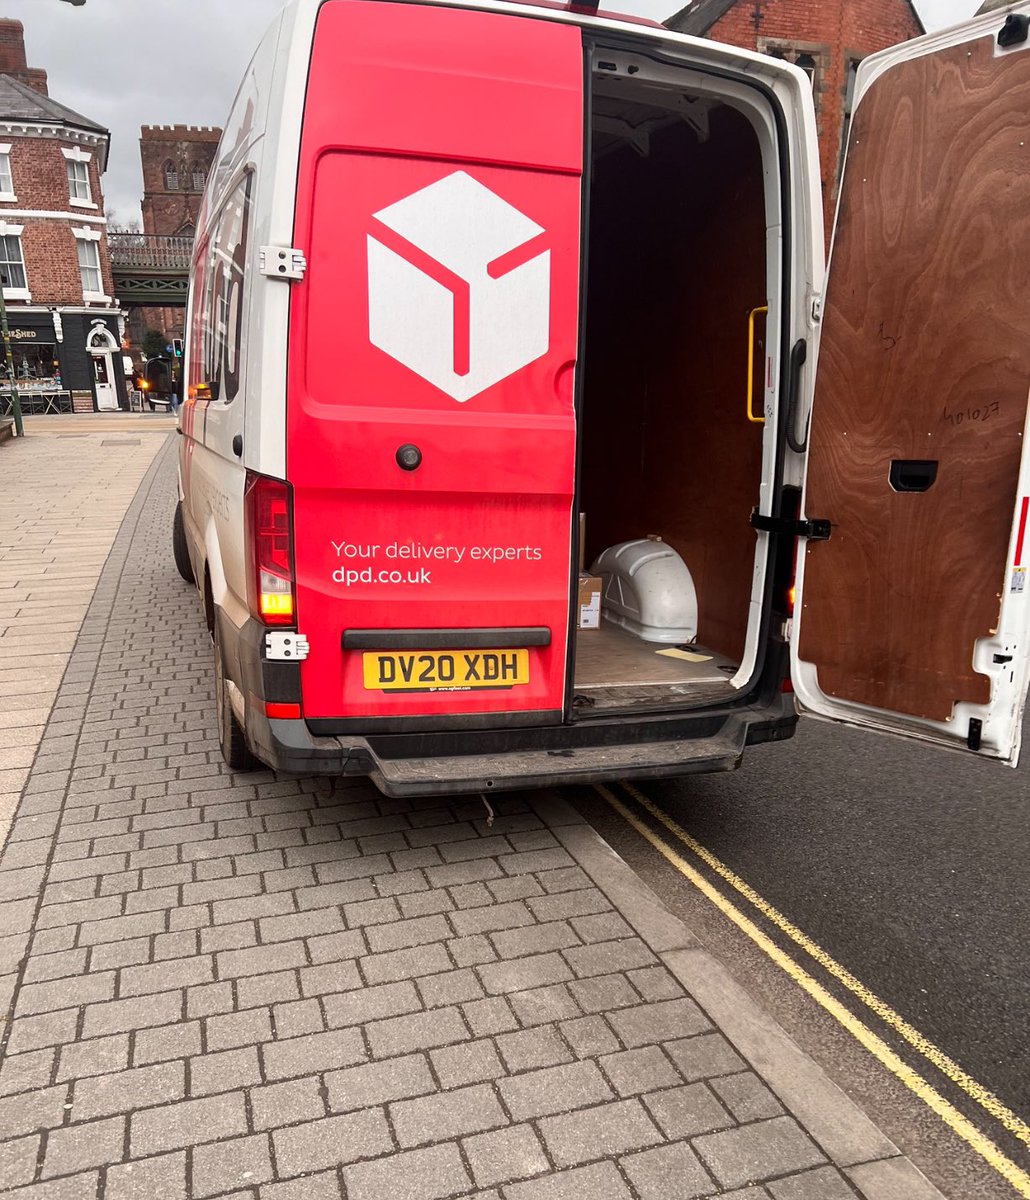 Yet more arrogant parking from a DPD driver in #Shrewsbury. I think it’s about time we all accepted that DPD drivers can park just where they like, double yellow lines, cycle paths. All fair game. #yplac #AbbeyForegate There’s a parking lot just around the corner, btw.